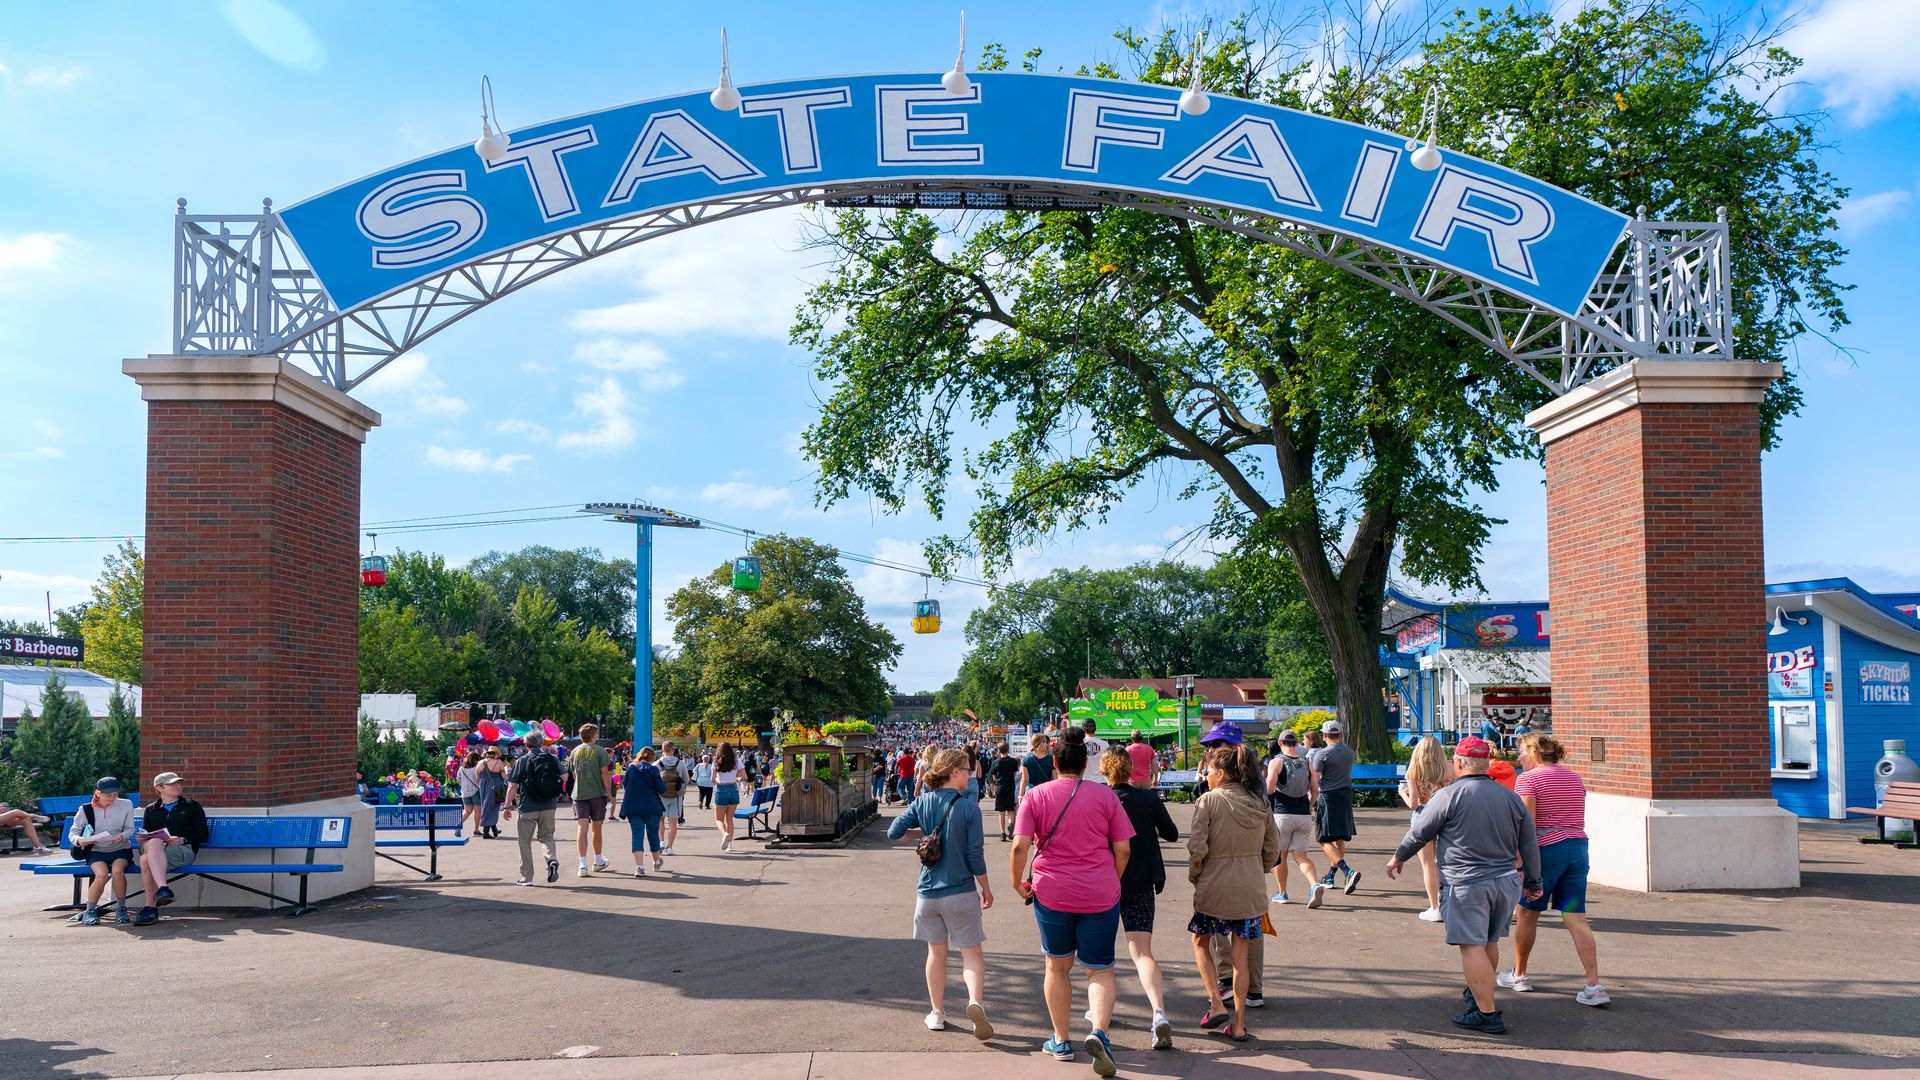 The entrance of the state fair 